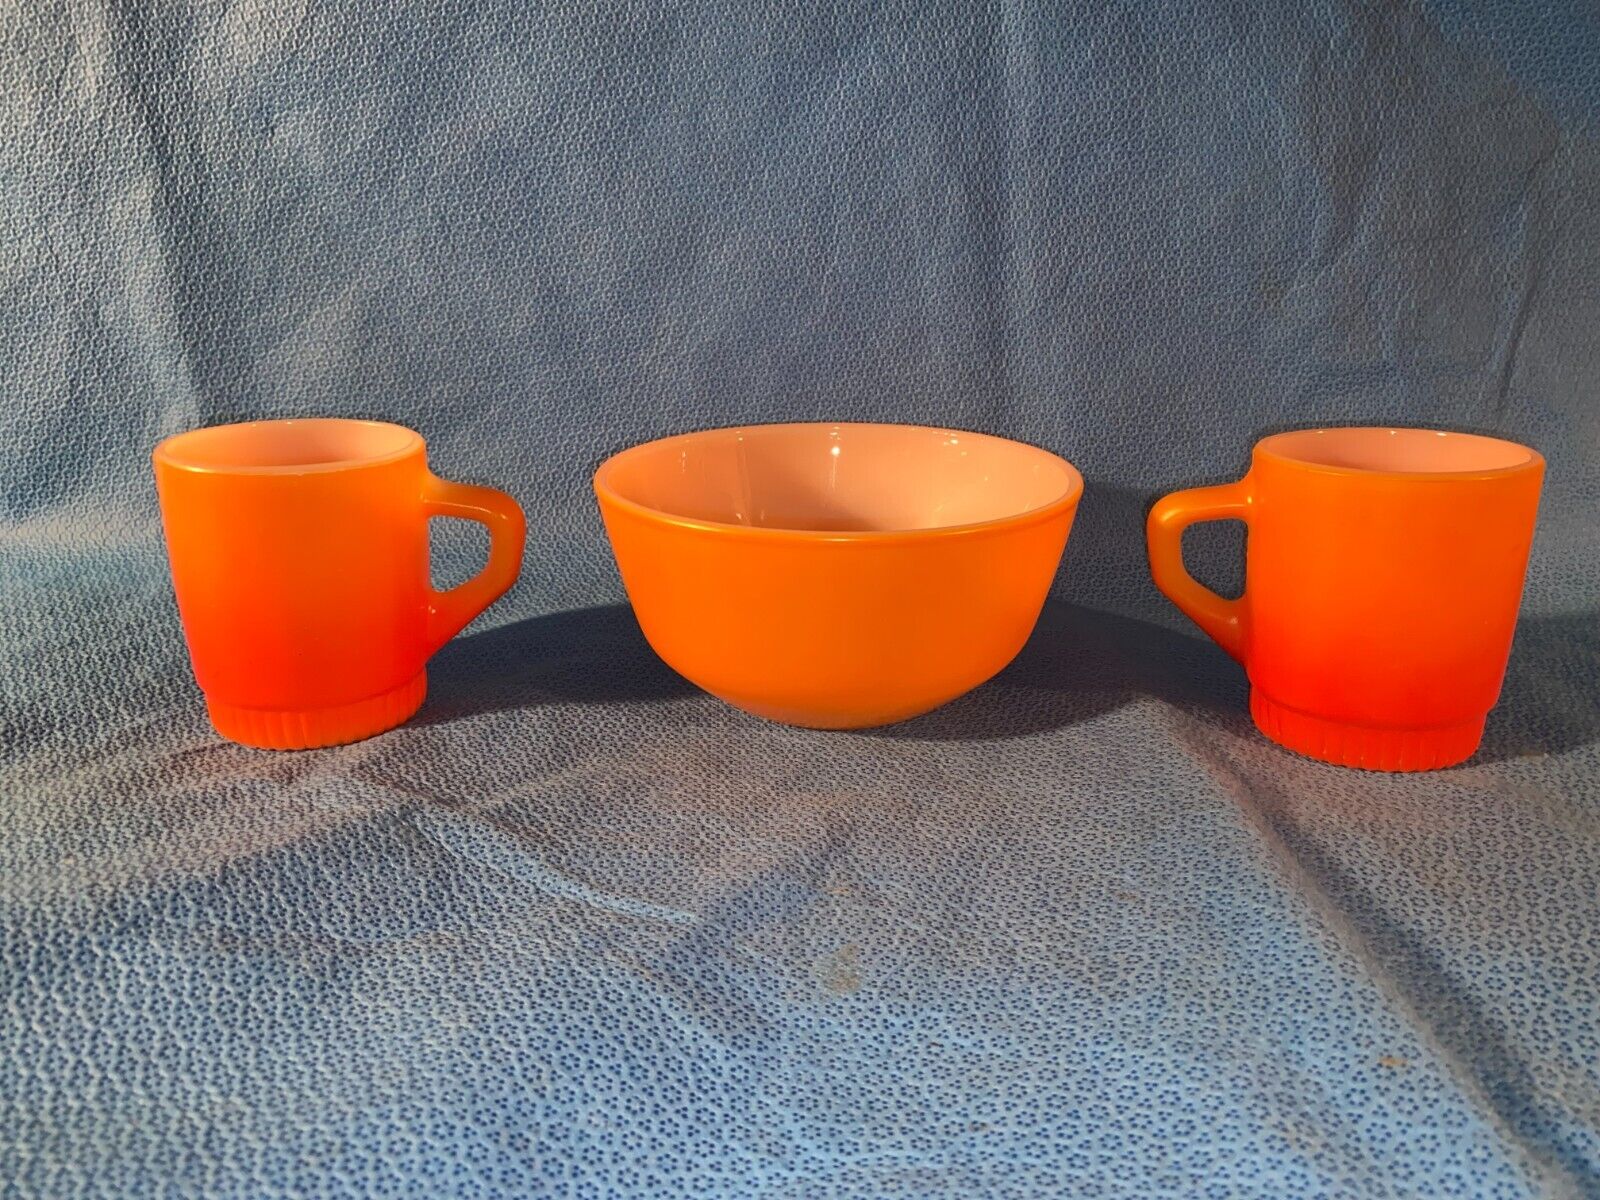 Anchor Hocking Fire King Two Orange Coffee Mugs and Bowl 6 Inch Diameter